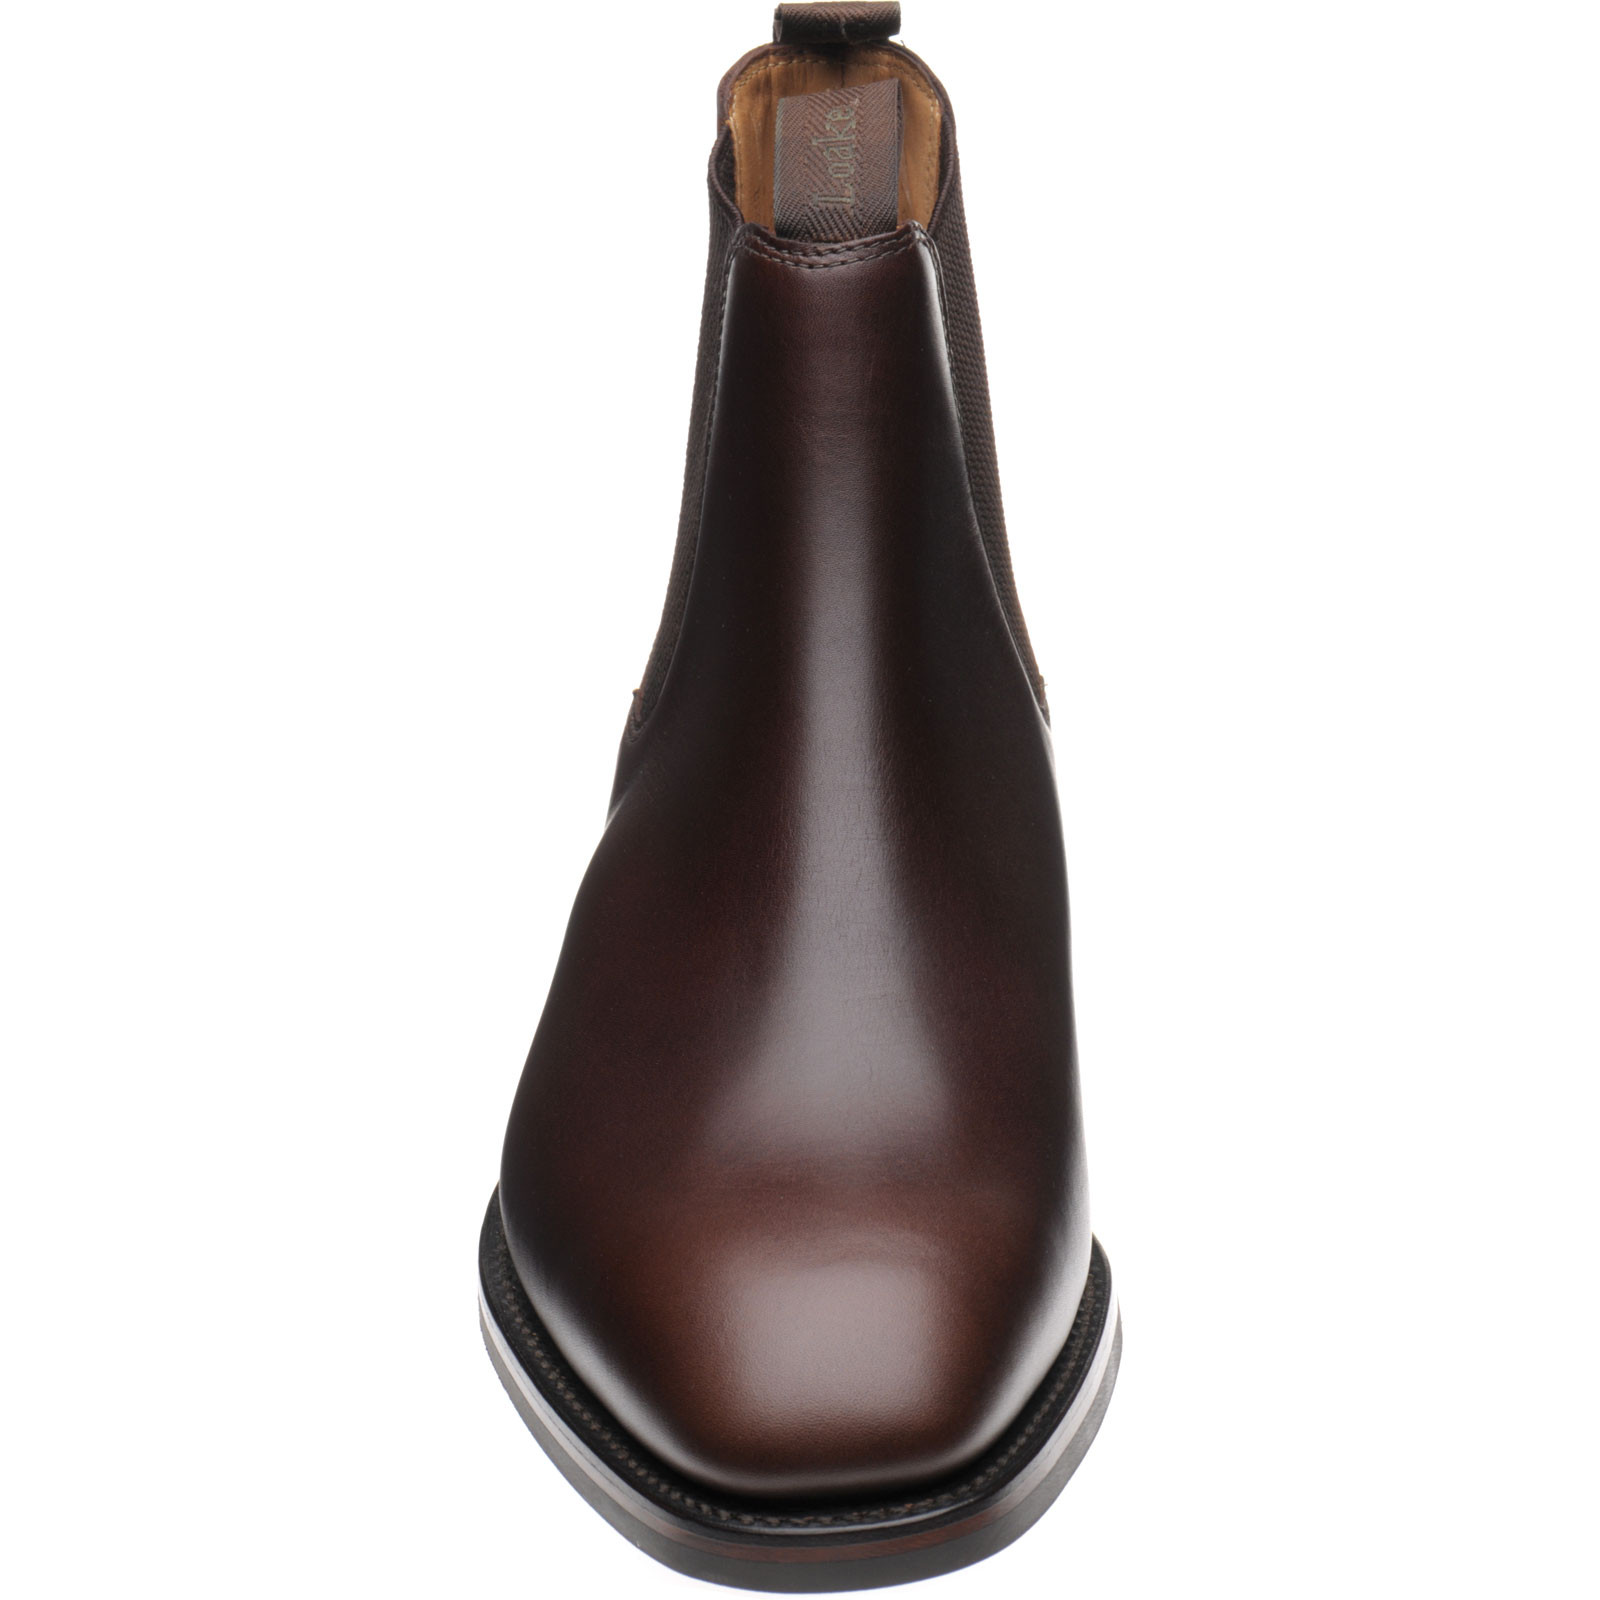 Loake shoes | Loake 1880 Classic | Chatsworth (Rubber) in Dark Brown ...